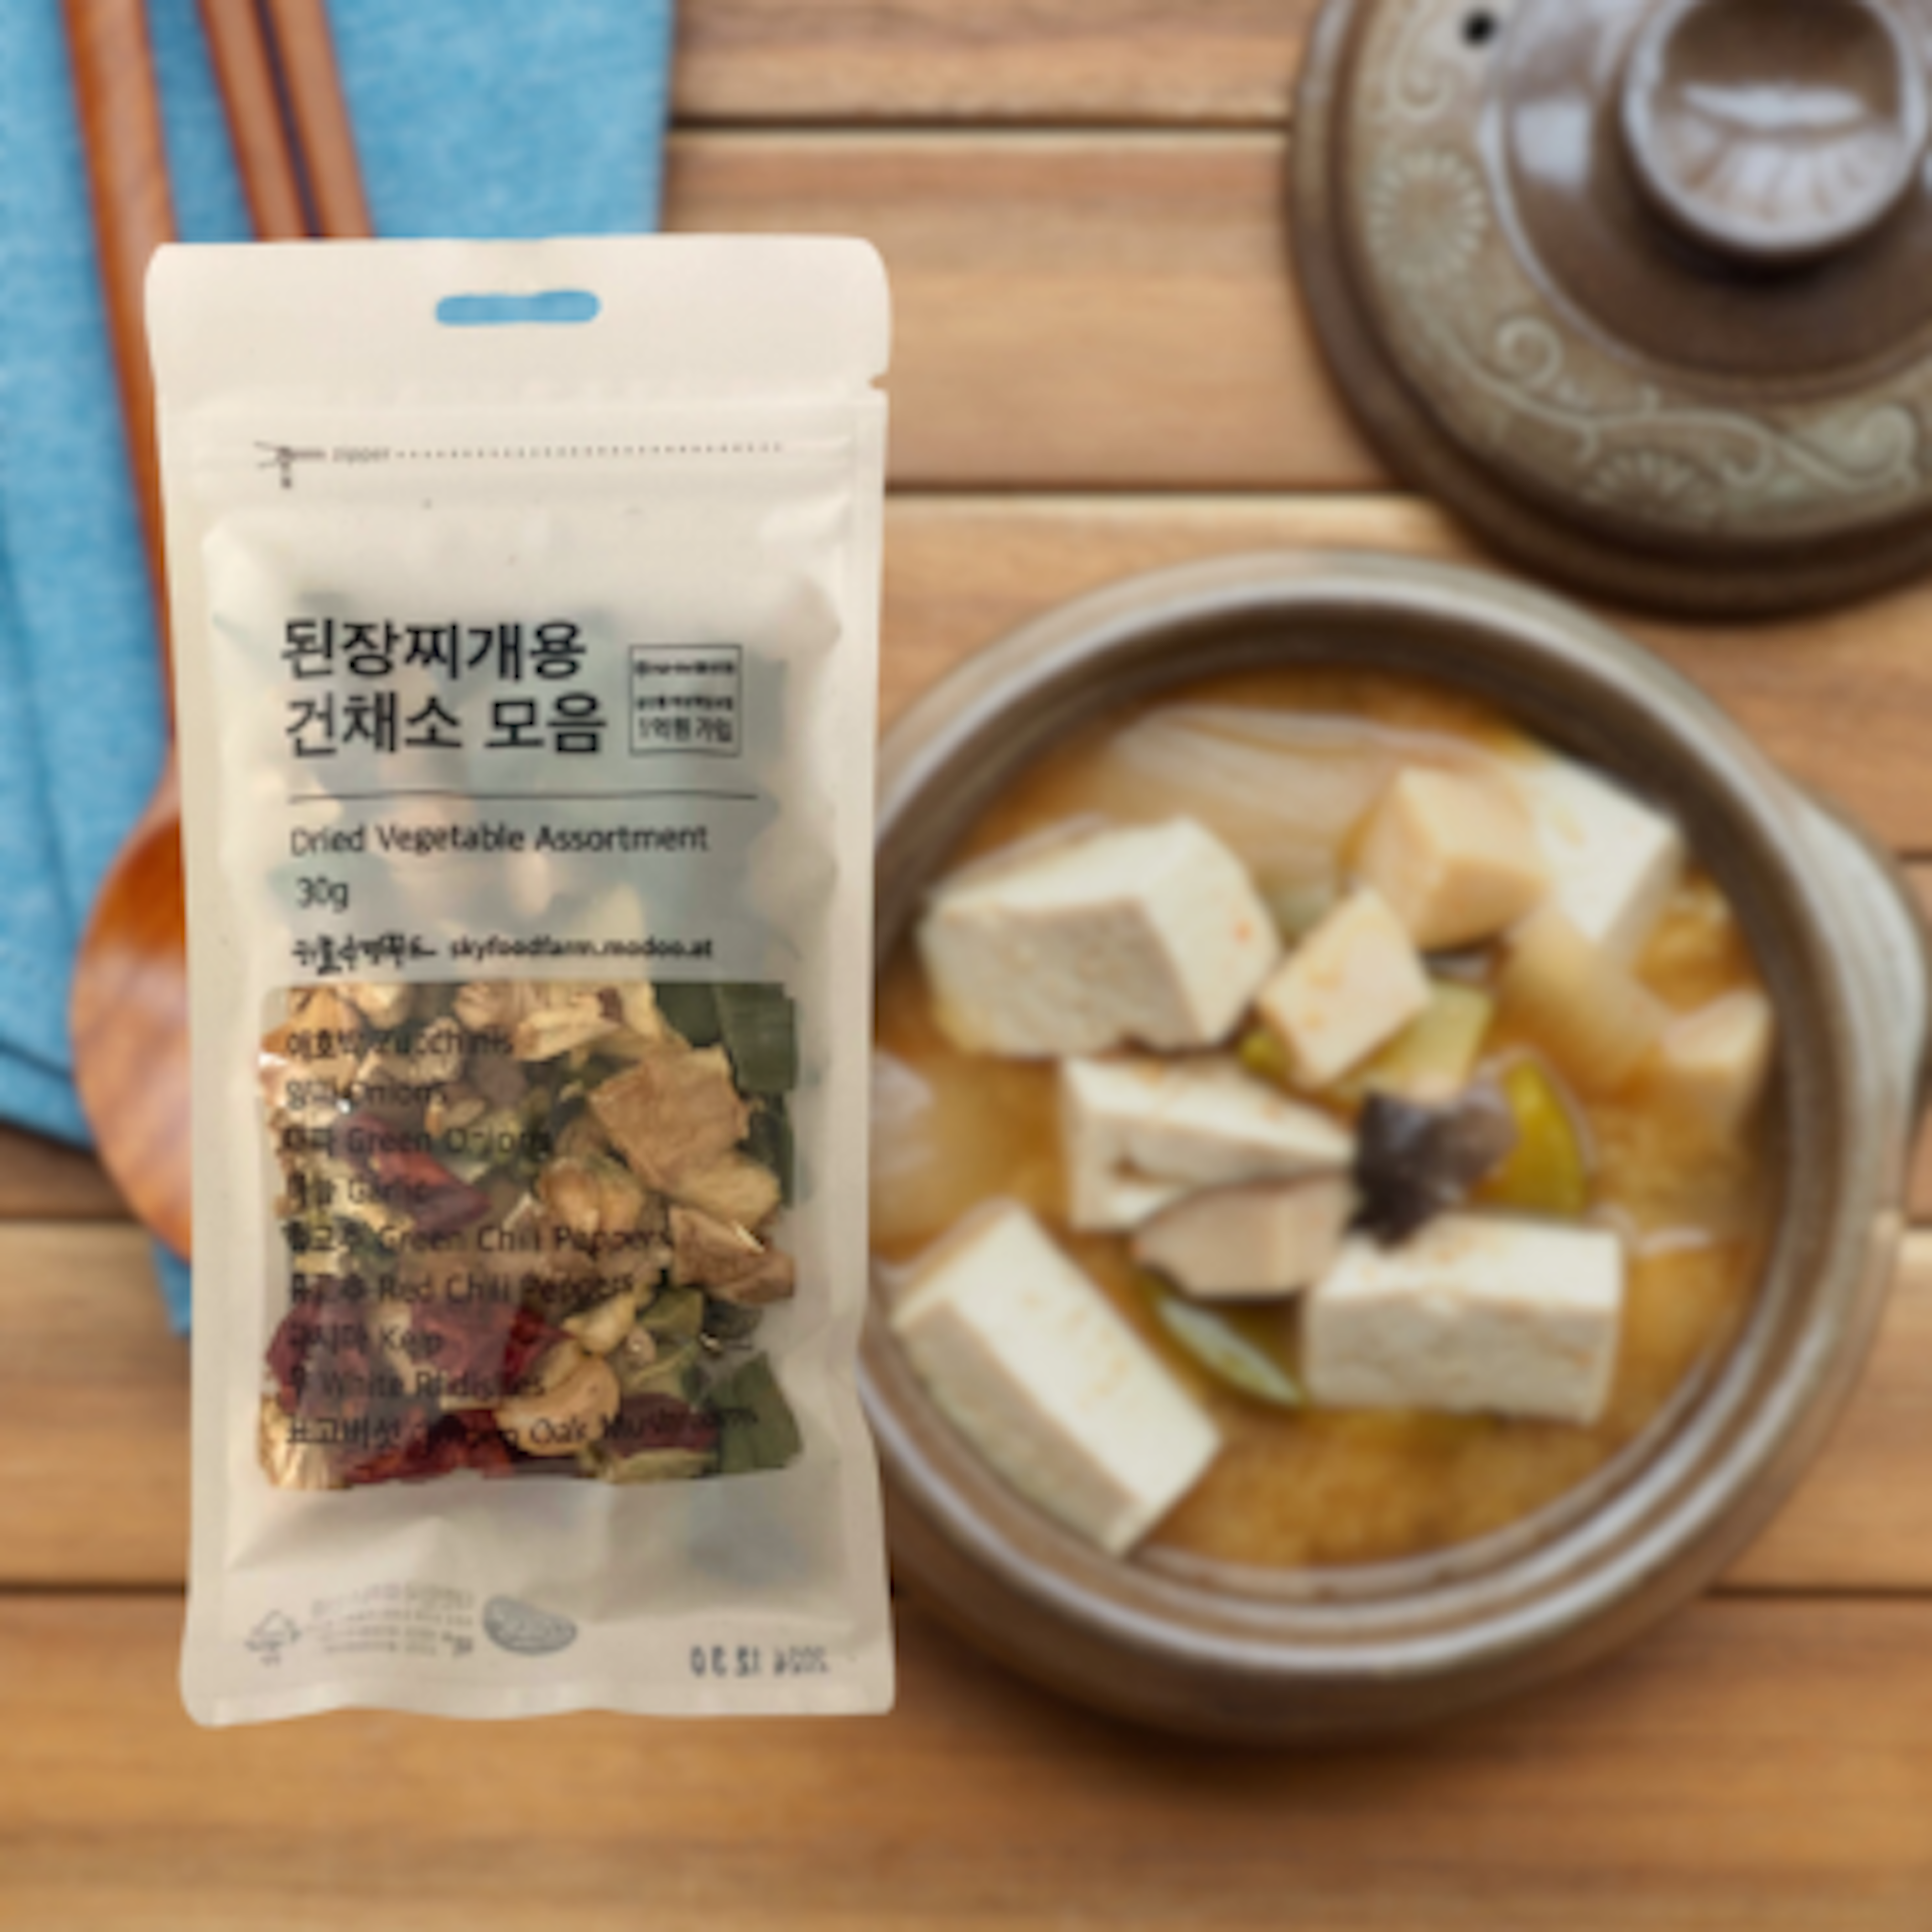 Dried Vegetable Assortment for Doenjang-Jjigae 30g - Easy and Delicious Korean Stew